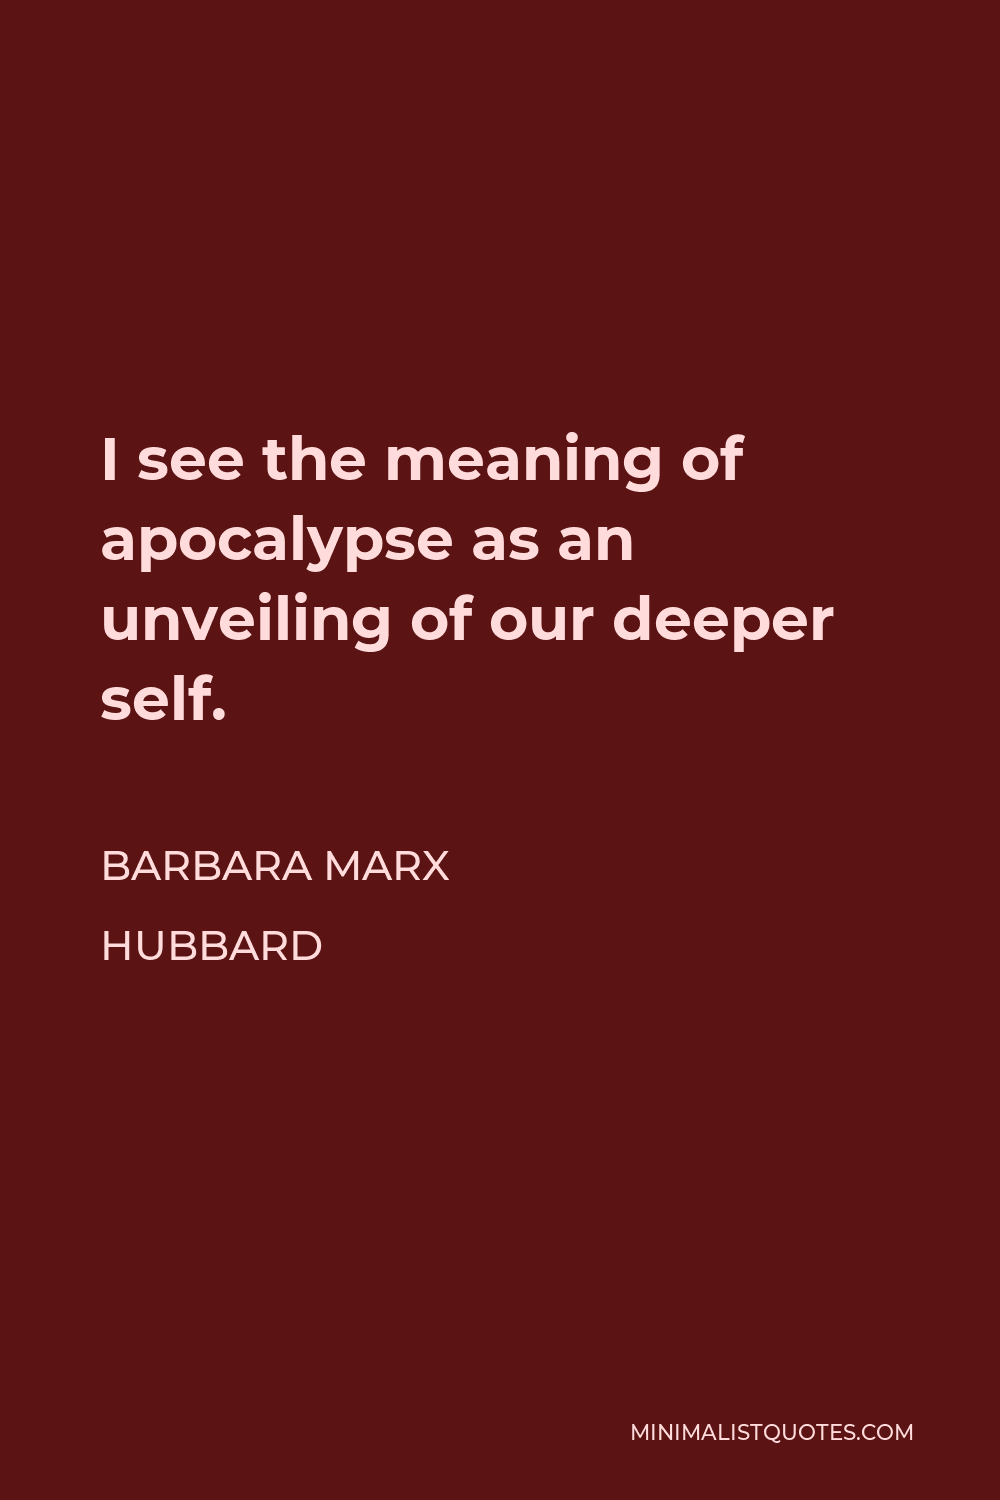 Barbara Marx Hubbard Quote - I see the meaning of apocalypse as an unveiling of our deeper self.